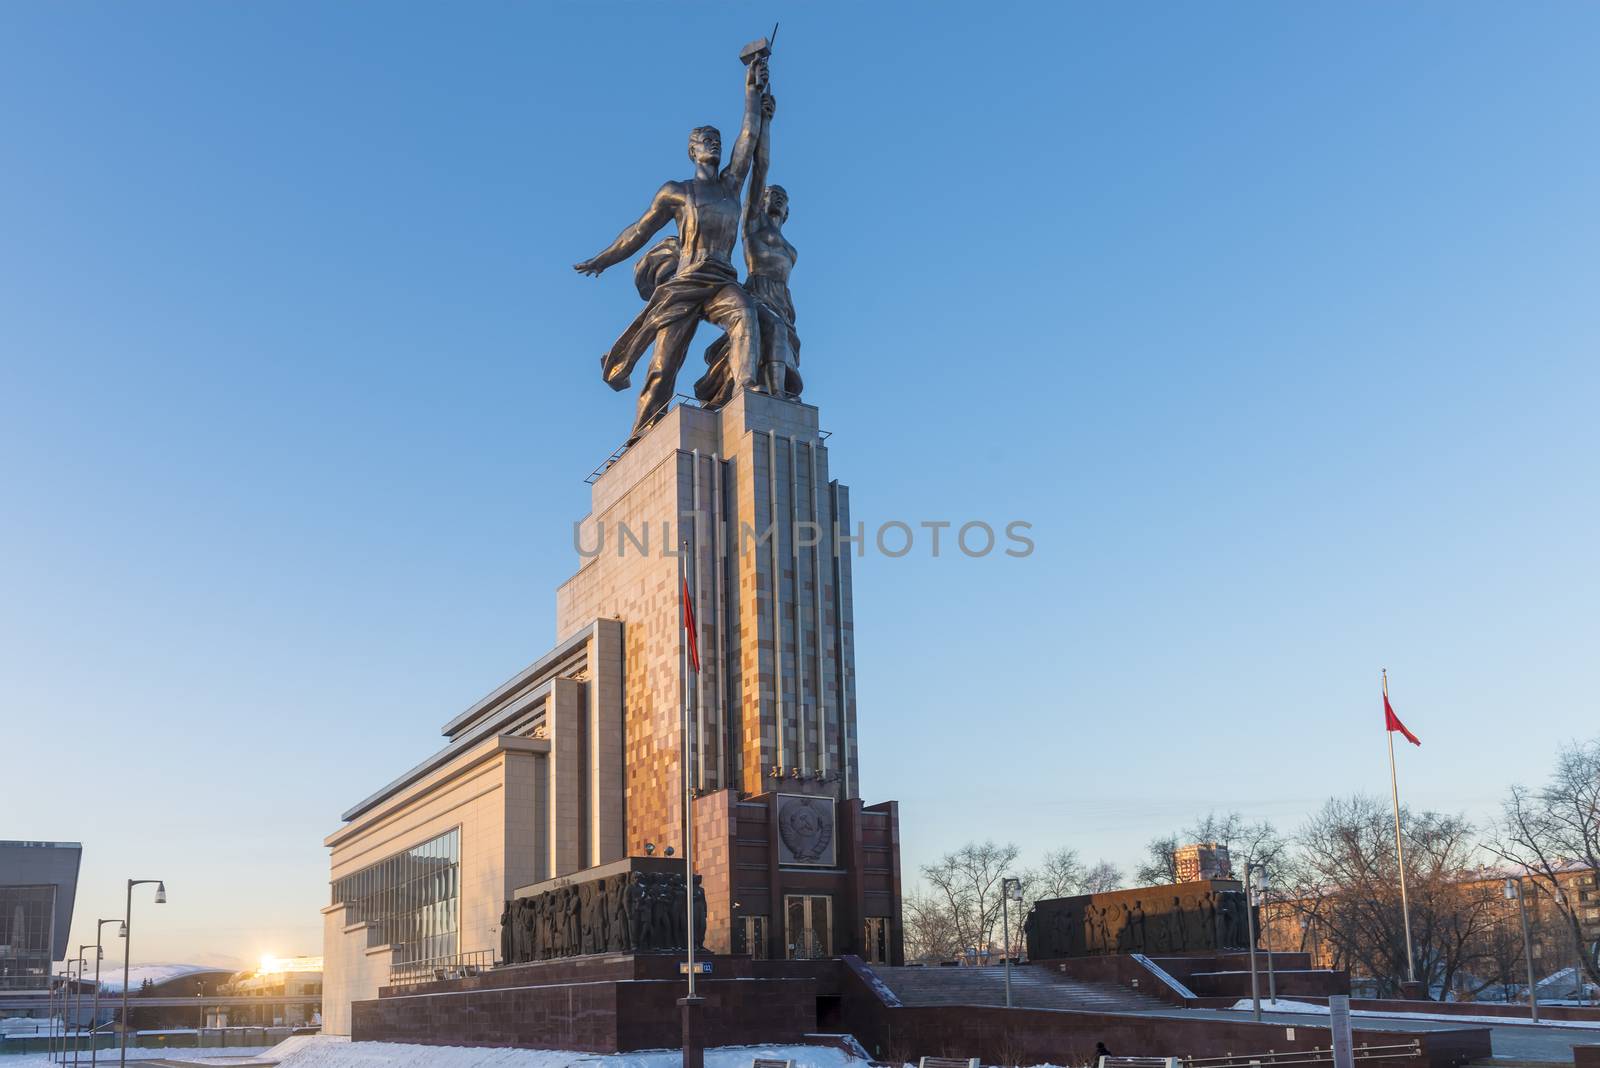 The famous monument at VDNKh in Moscow in winte by rogkoff